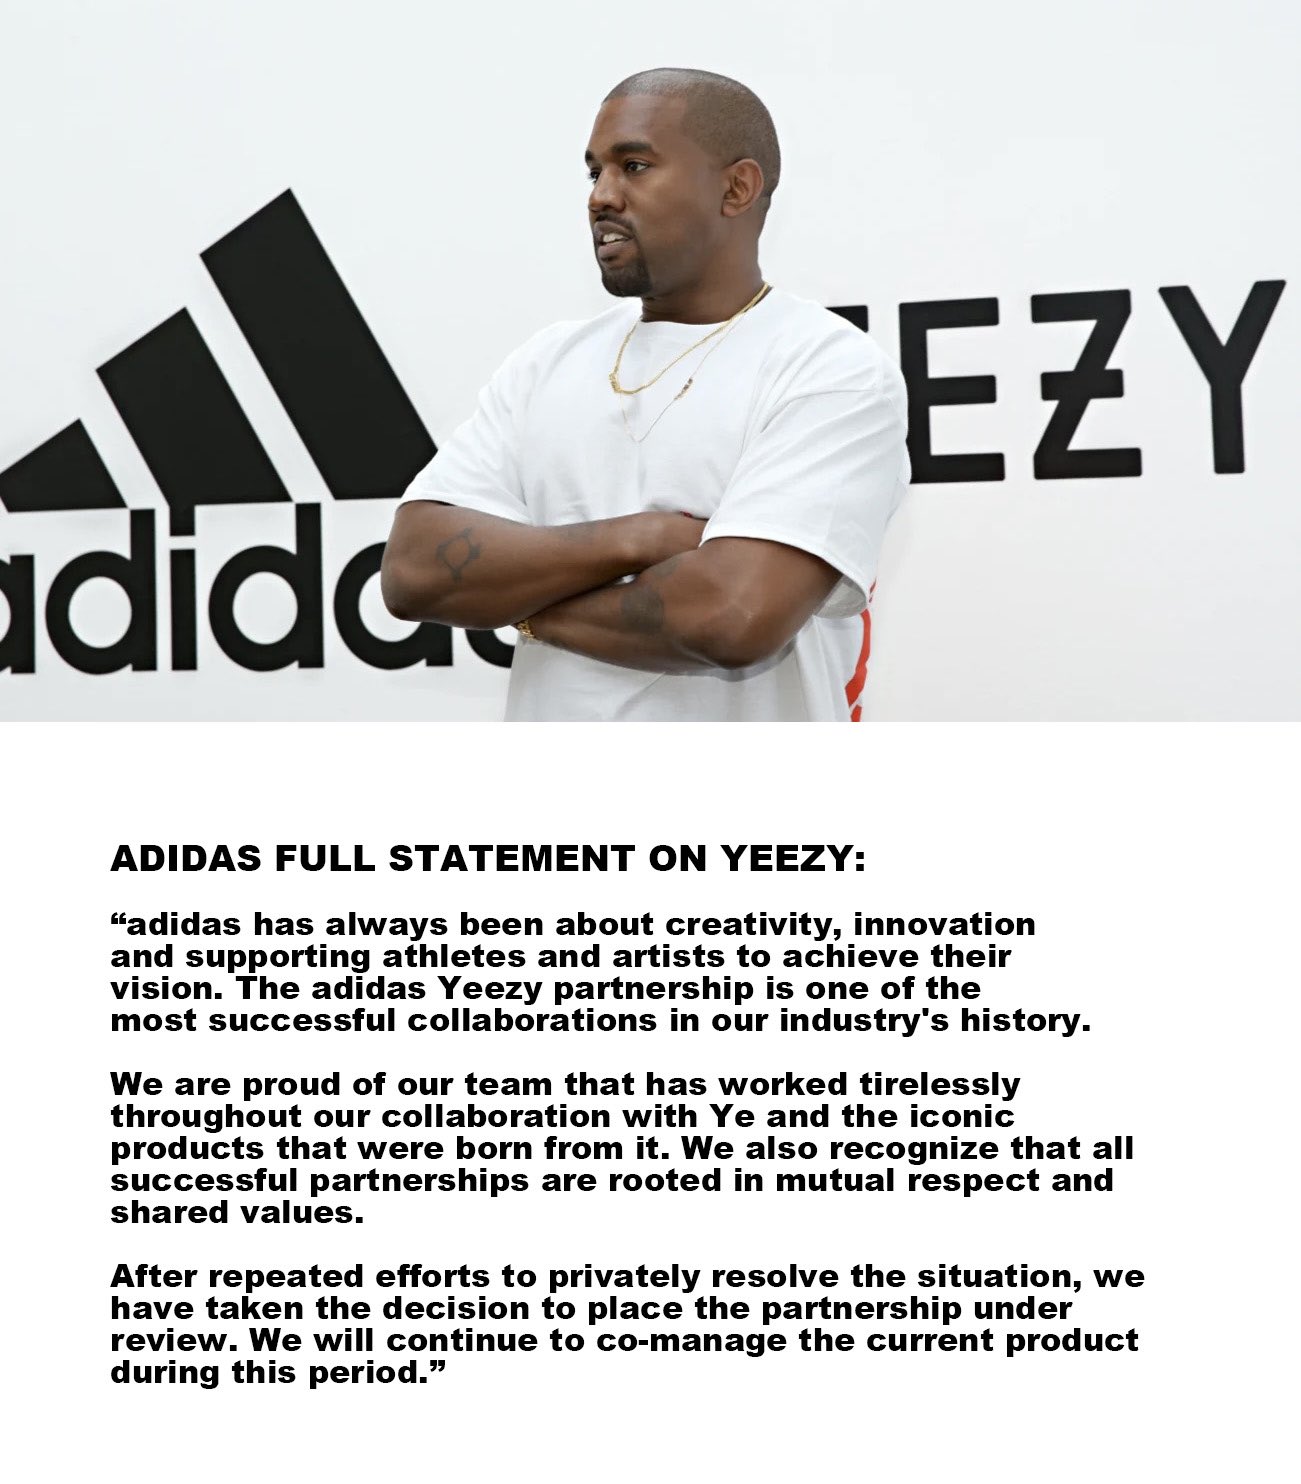 Vooruitzien Raar verkoopplan Nick DePaula on Twitter: "BREAKING: Adidas says Kanye West's Yeezy category  is *under review* “After repeated efforts to privately resolve the  situation, we have taken the decision to place the partnership under